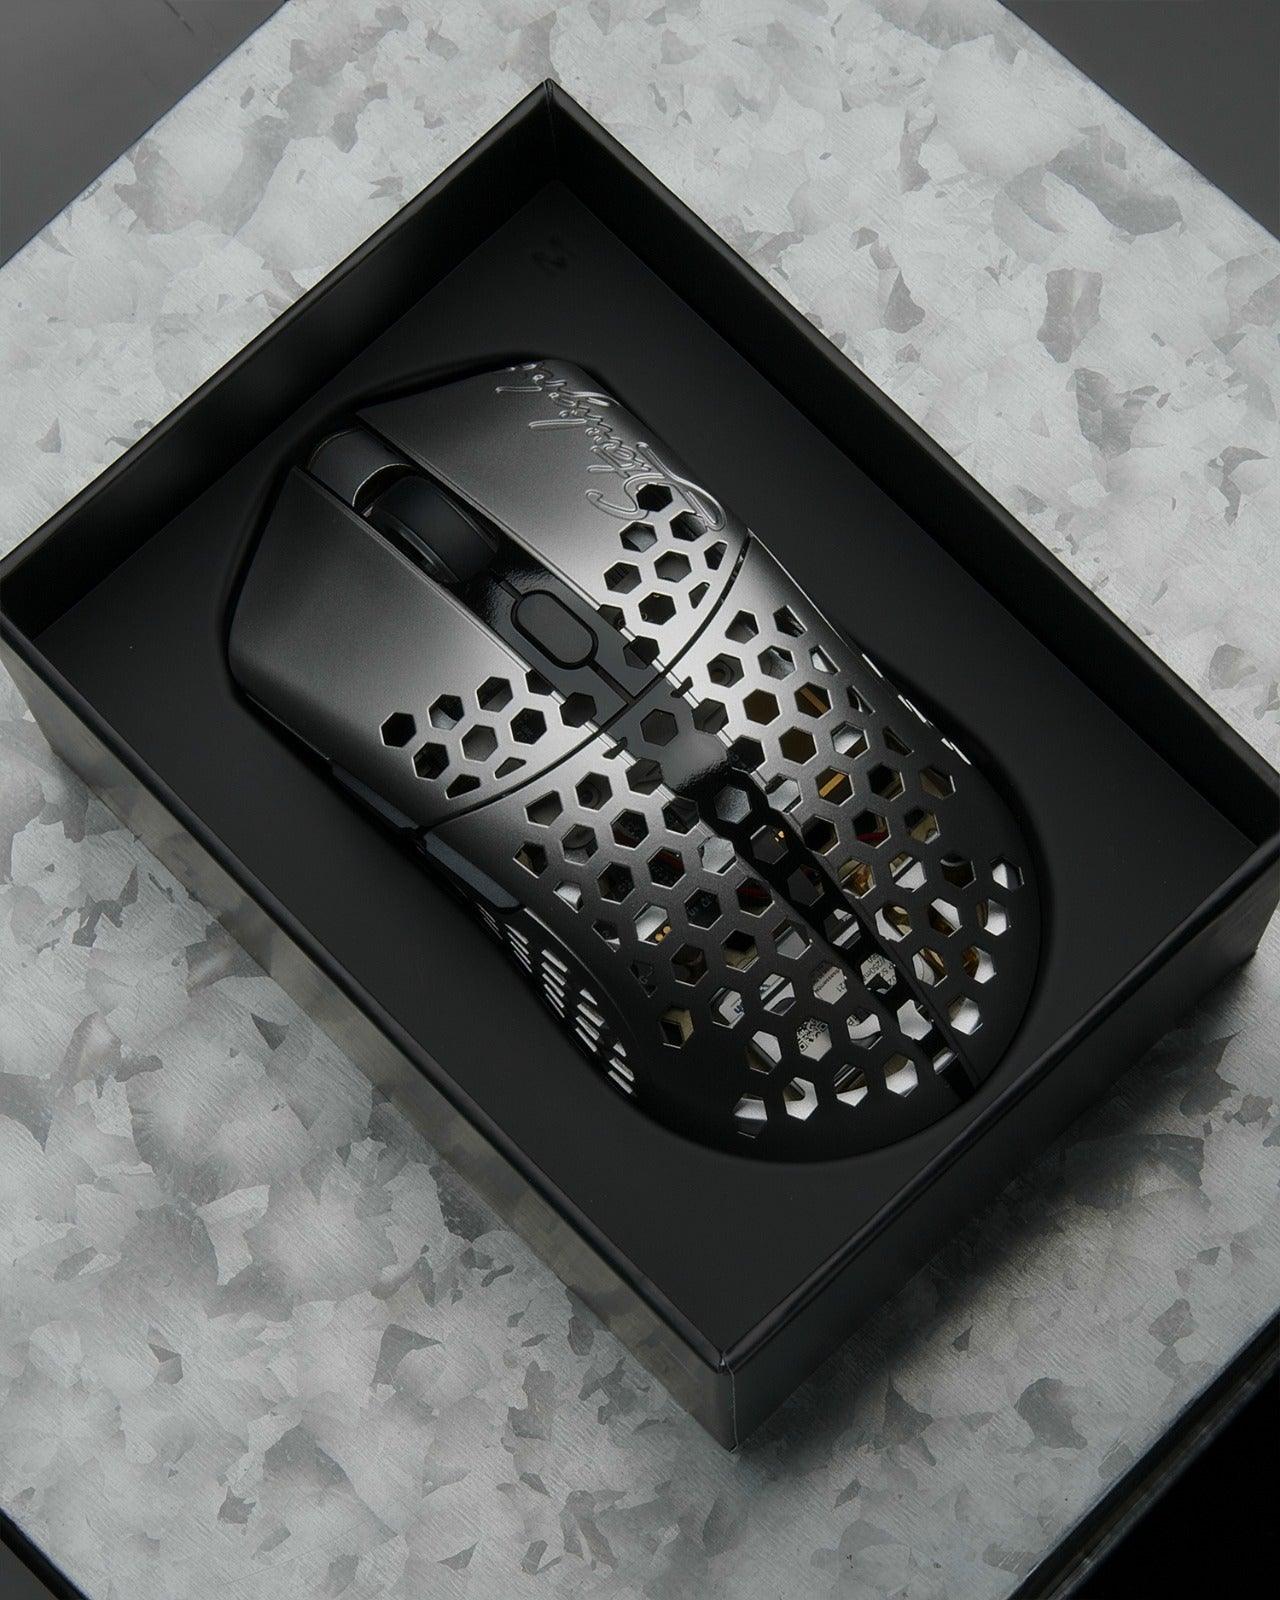 Finalmouse Starlight Pro TenZ Gaming Mouse - Small